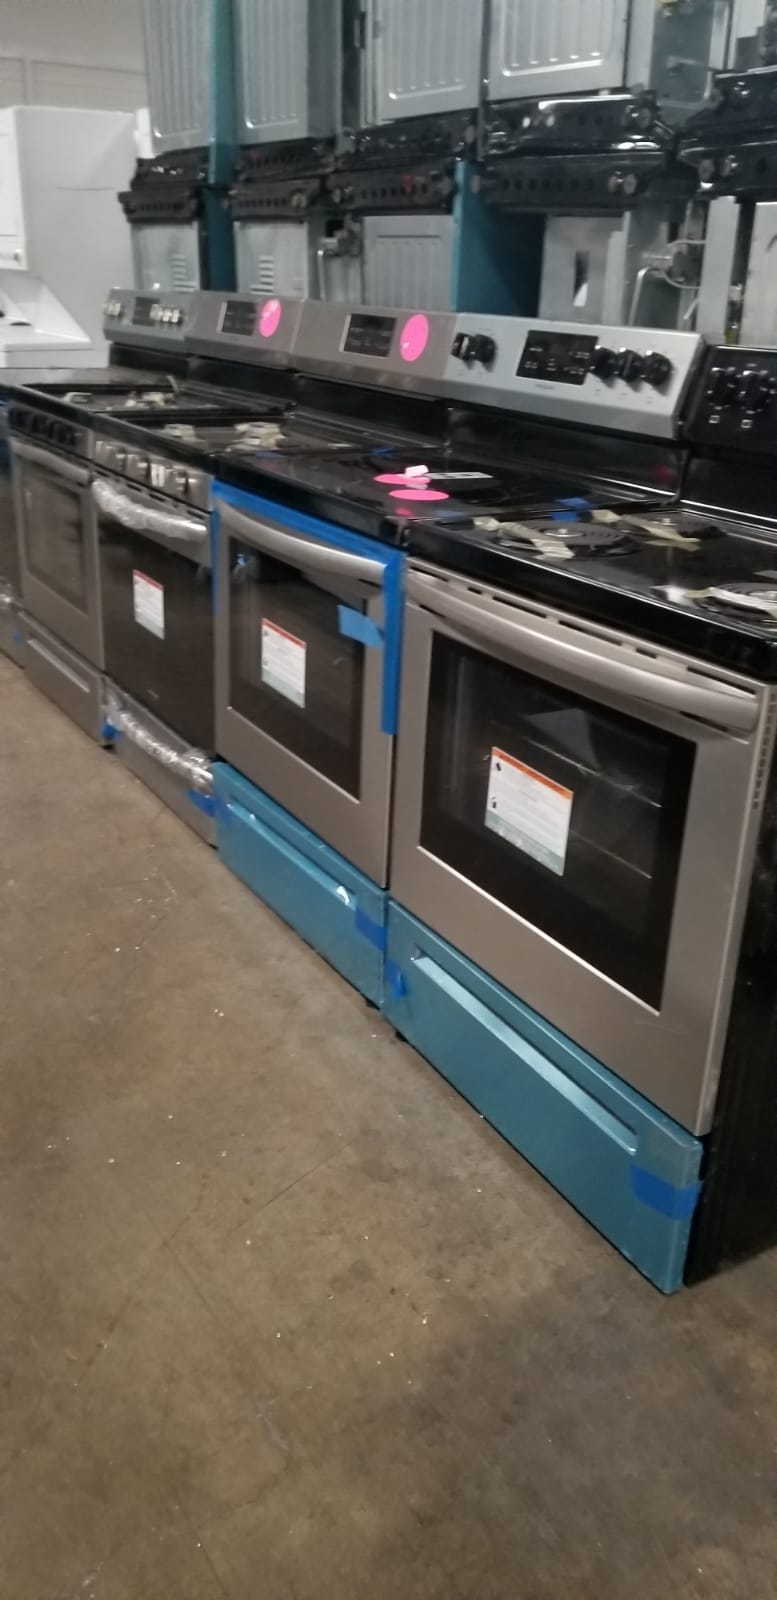 example of More Frigidaire scratch and dent appliances. Open box appliances available by the truckload.